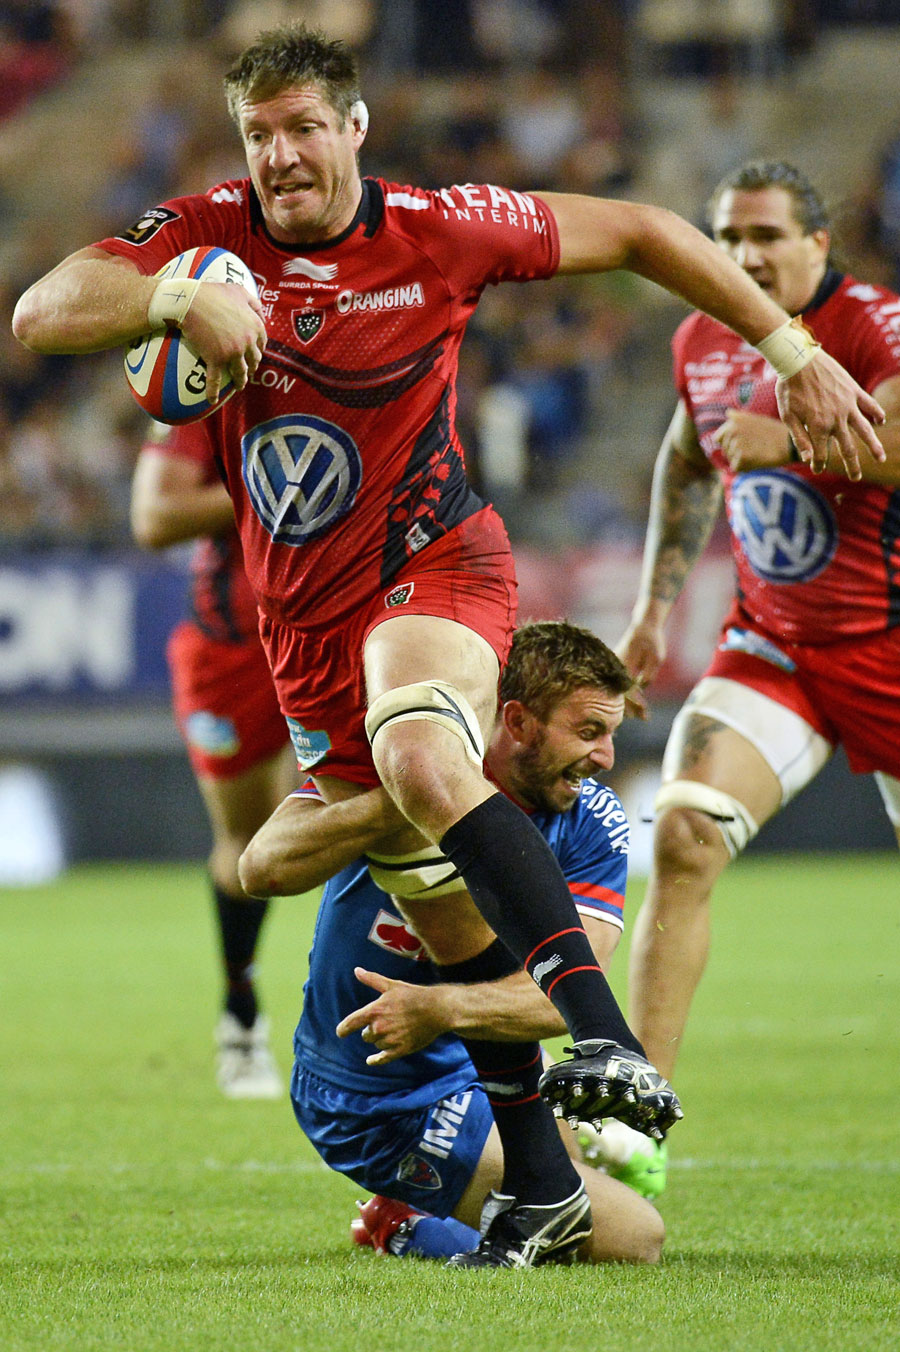 Grenoble's Benjamin Thierry attempts to tackle Toulon's Bakkies Botha